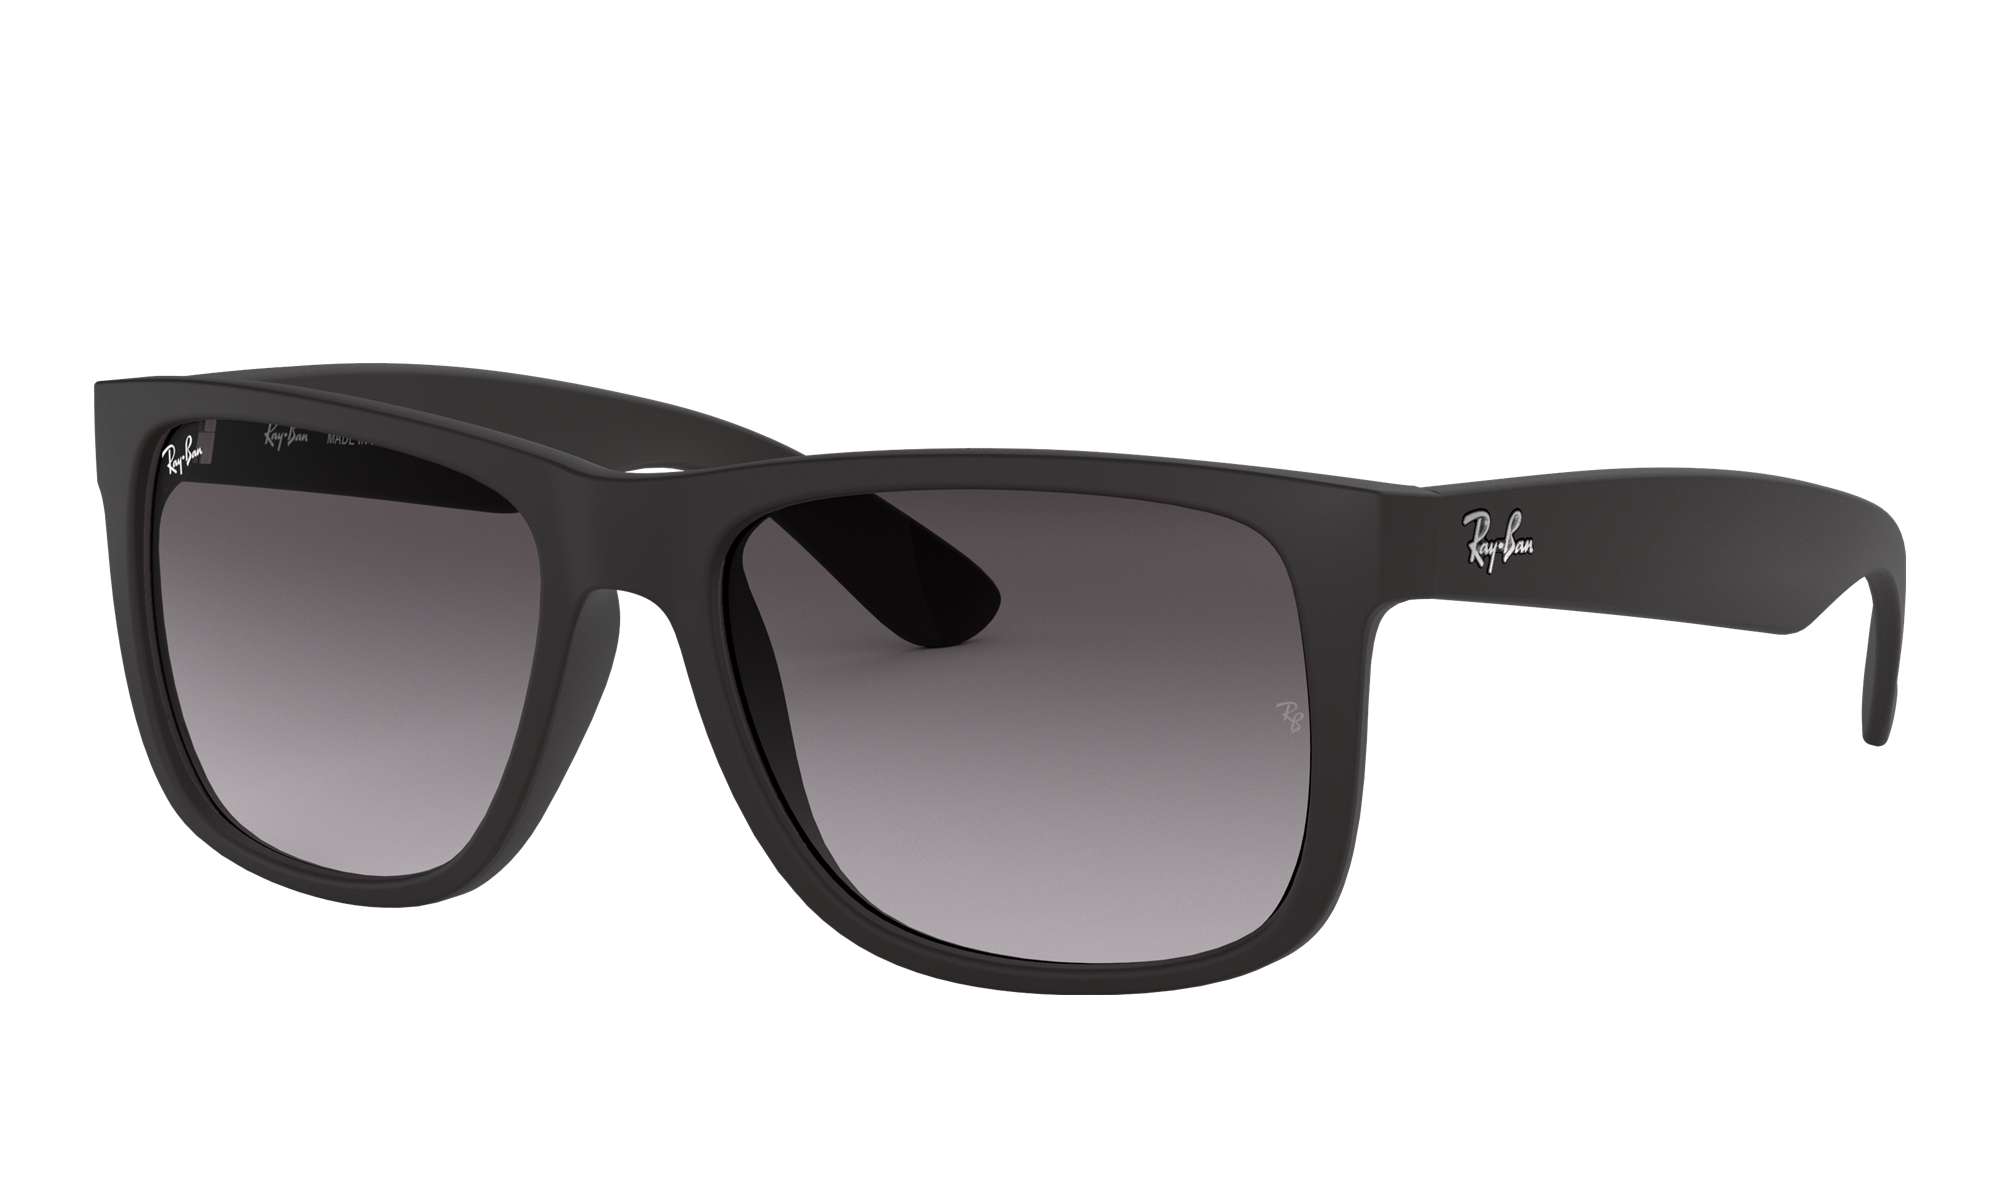 Ray-Ban Unisex Rb4165 Black Size: Extra Small